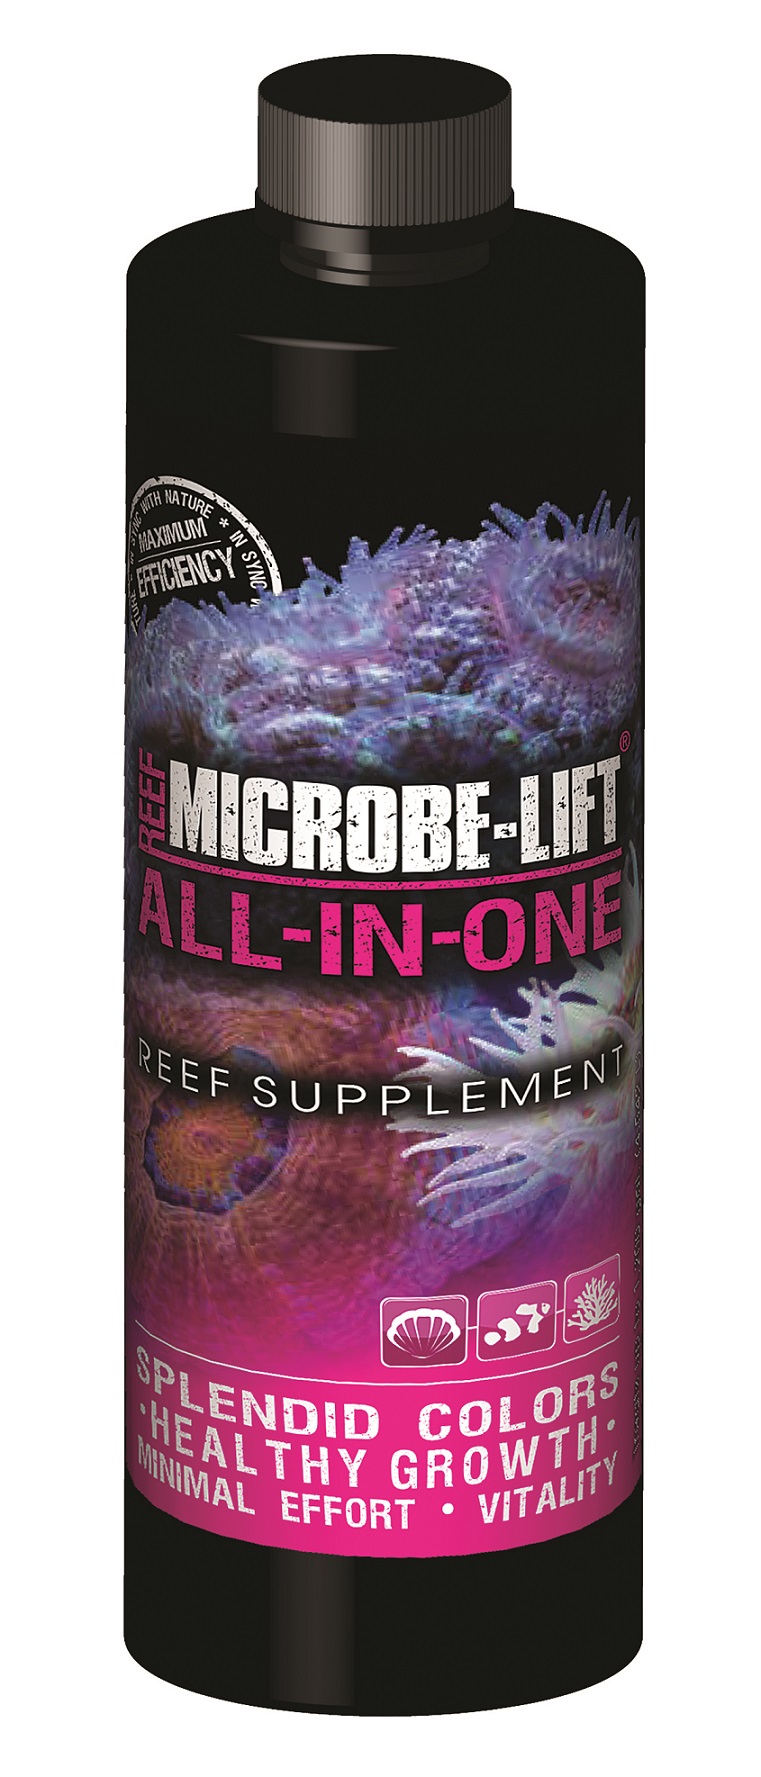 Microbe-Lift Complete, Microbe-Lift water care / nutrition